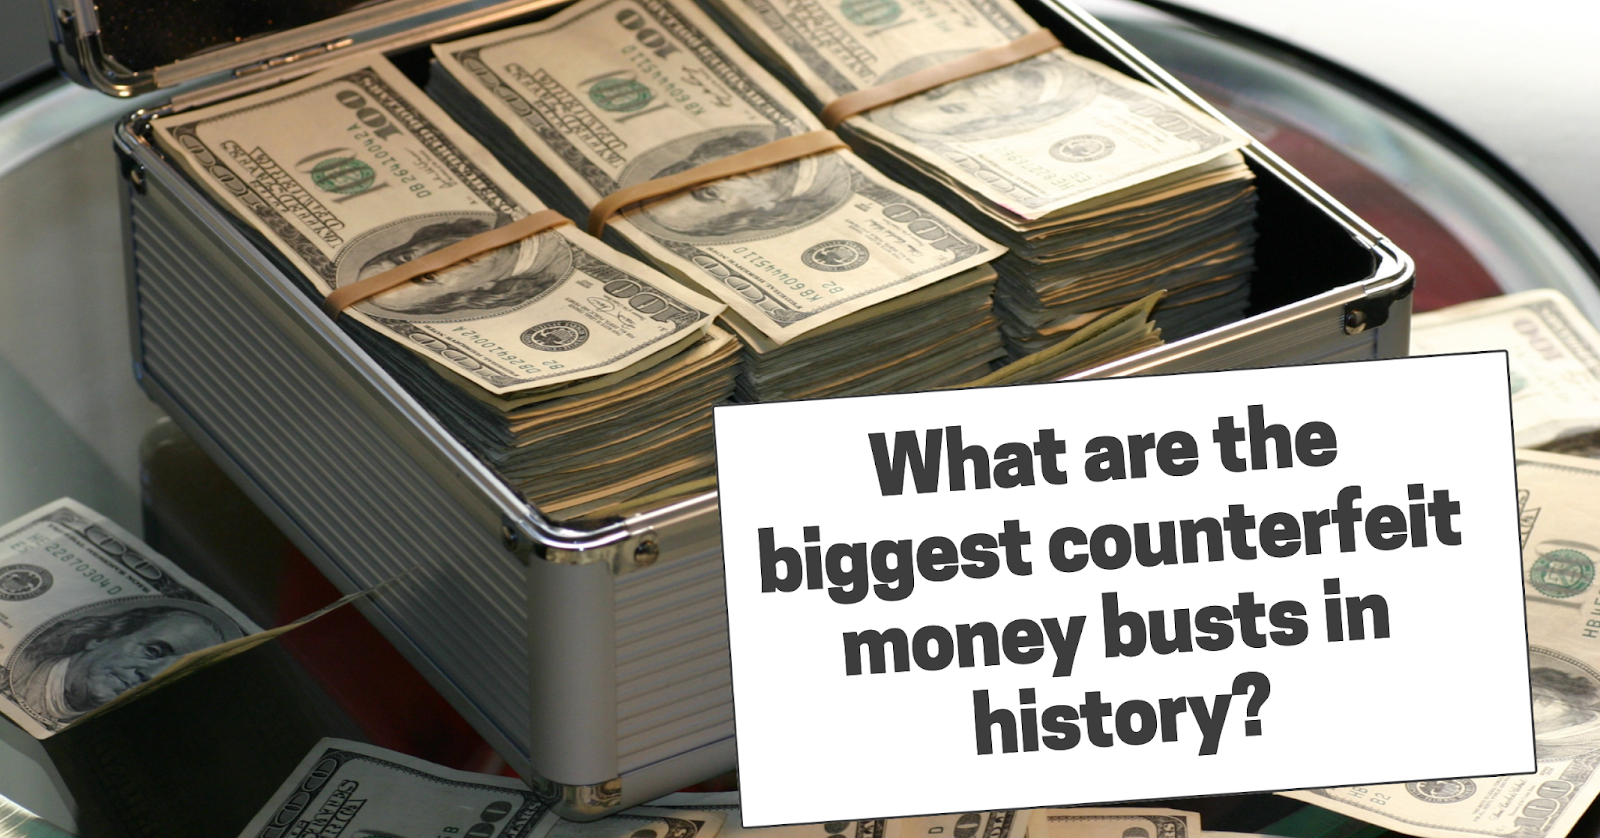 the biggest counterfeit money busts in history